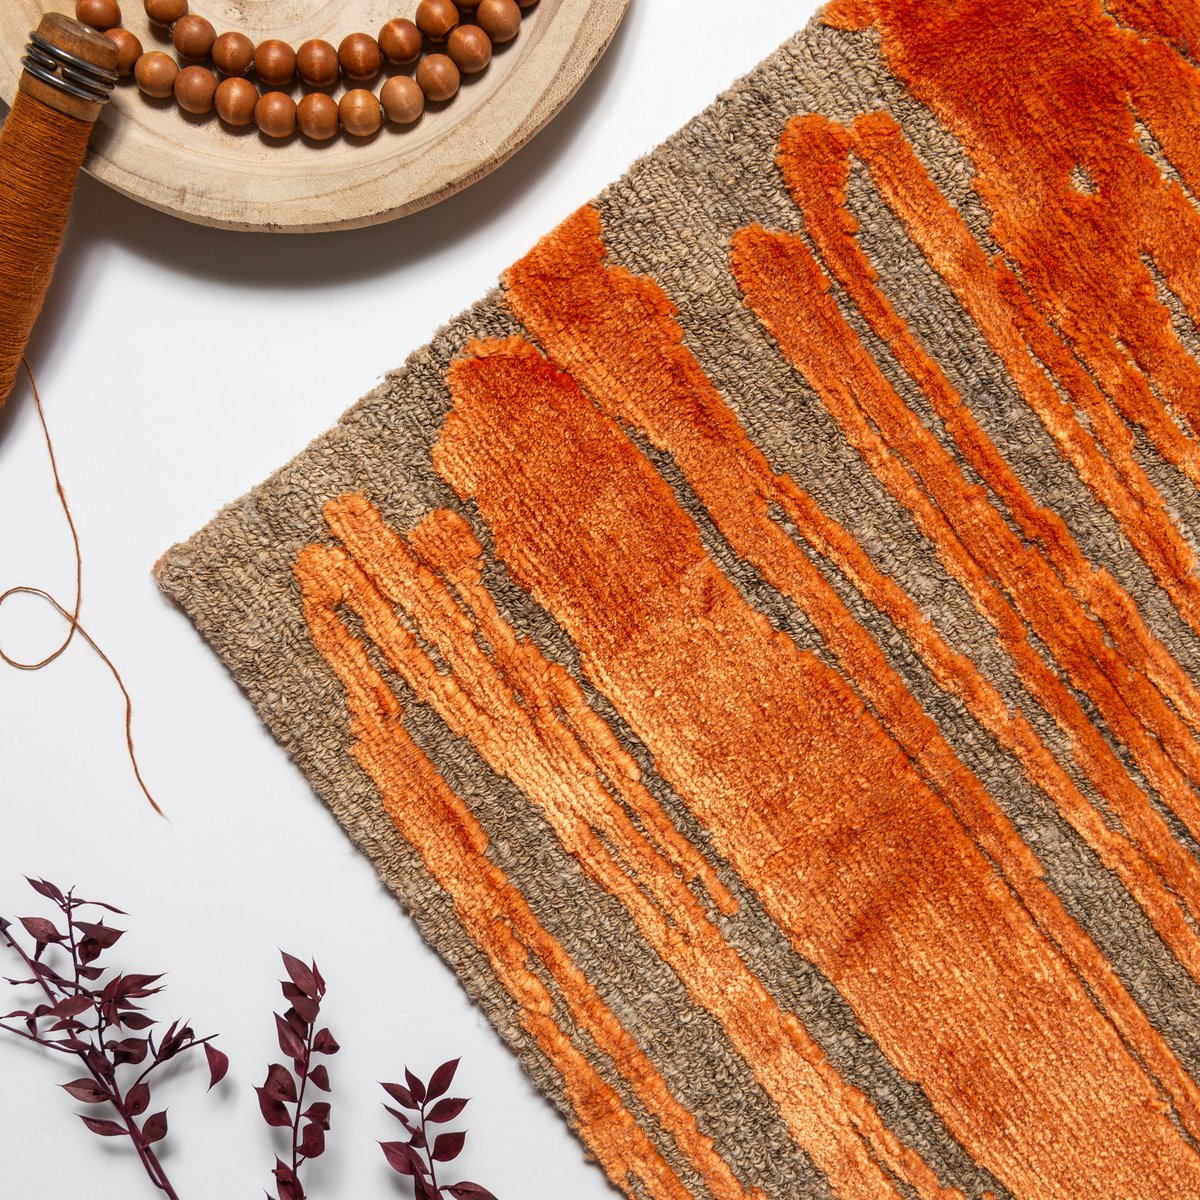 Synergy by Philippe David finishing this perfect autumn palette! 🍁

#jamiesterndesign #rugdesign #designerrugs #rugcollection #arearugs #naturalfibers #sustainabledesign #design #rugs #ruginspo #handknotted #handknottedrugs #interiordesign